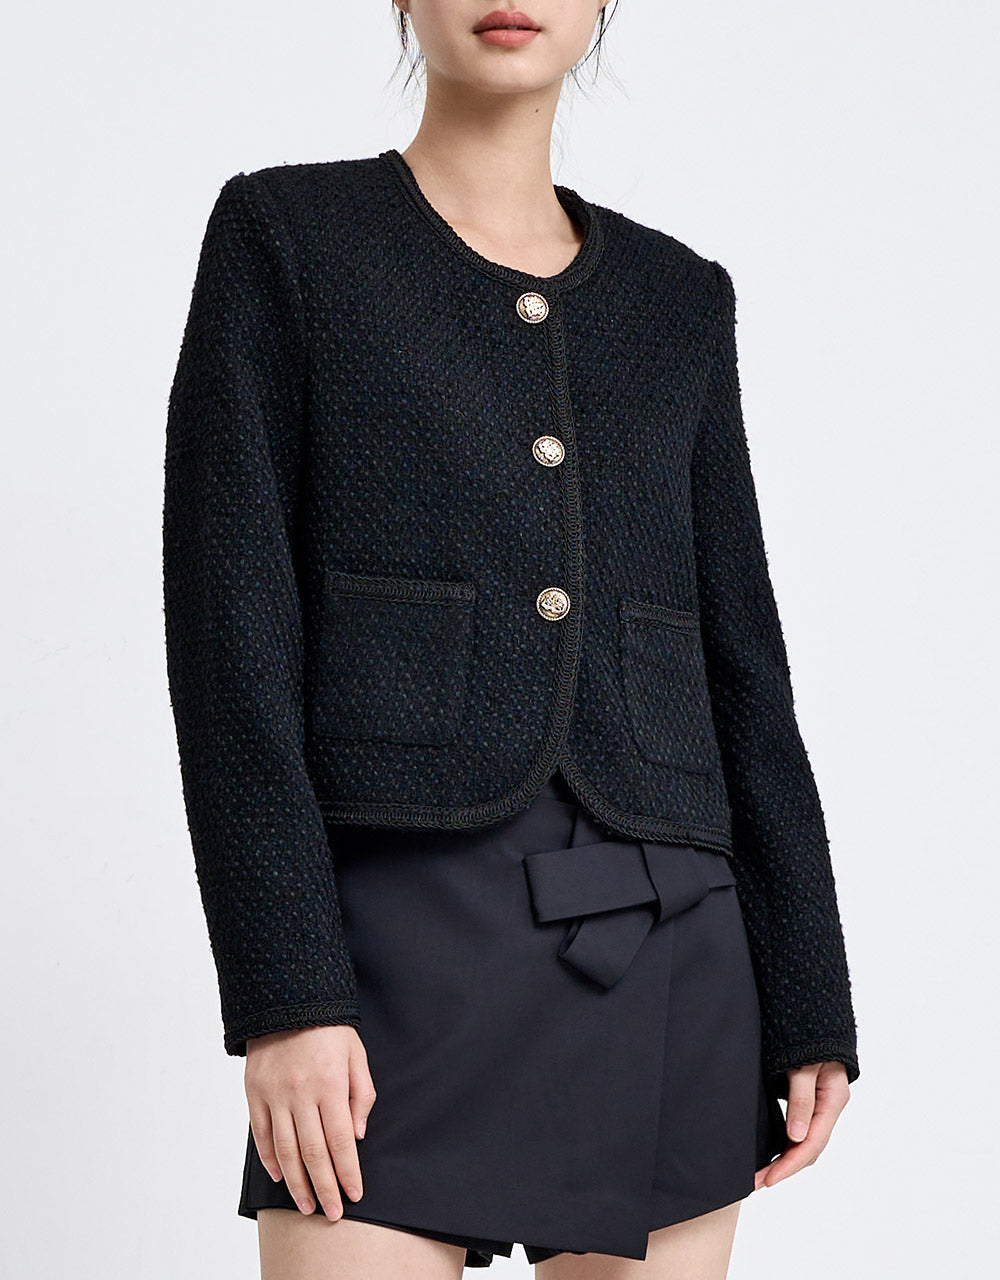 Tweed Jacket | Buttoned Chanel Style Jacket for Women Casual Work ...